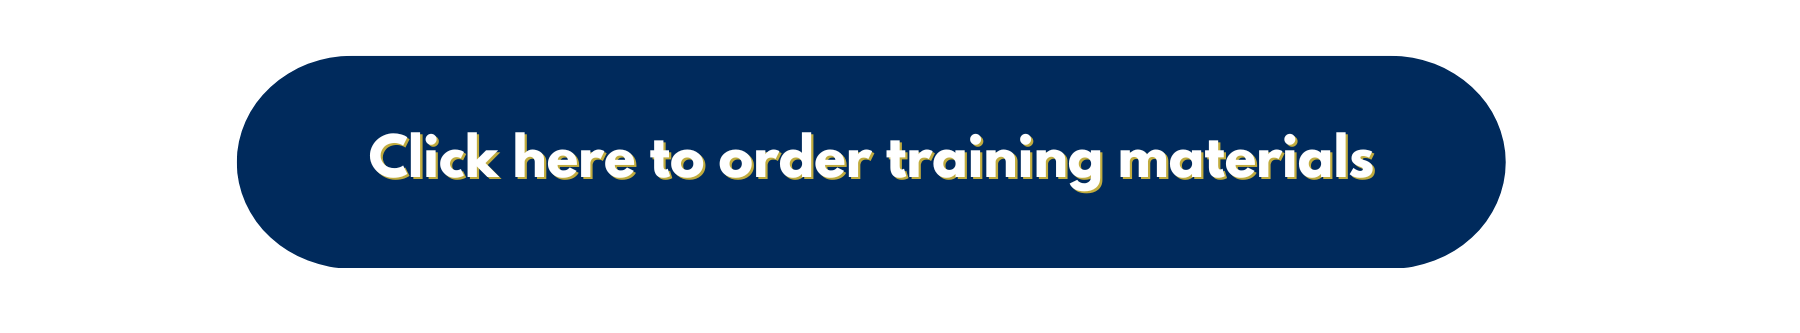 Click here to order training materials